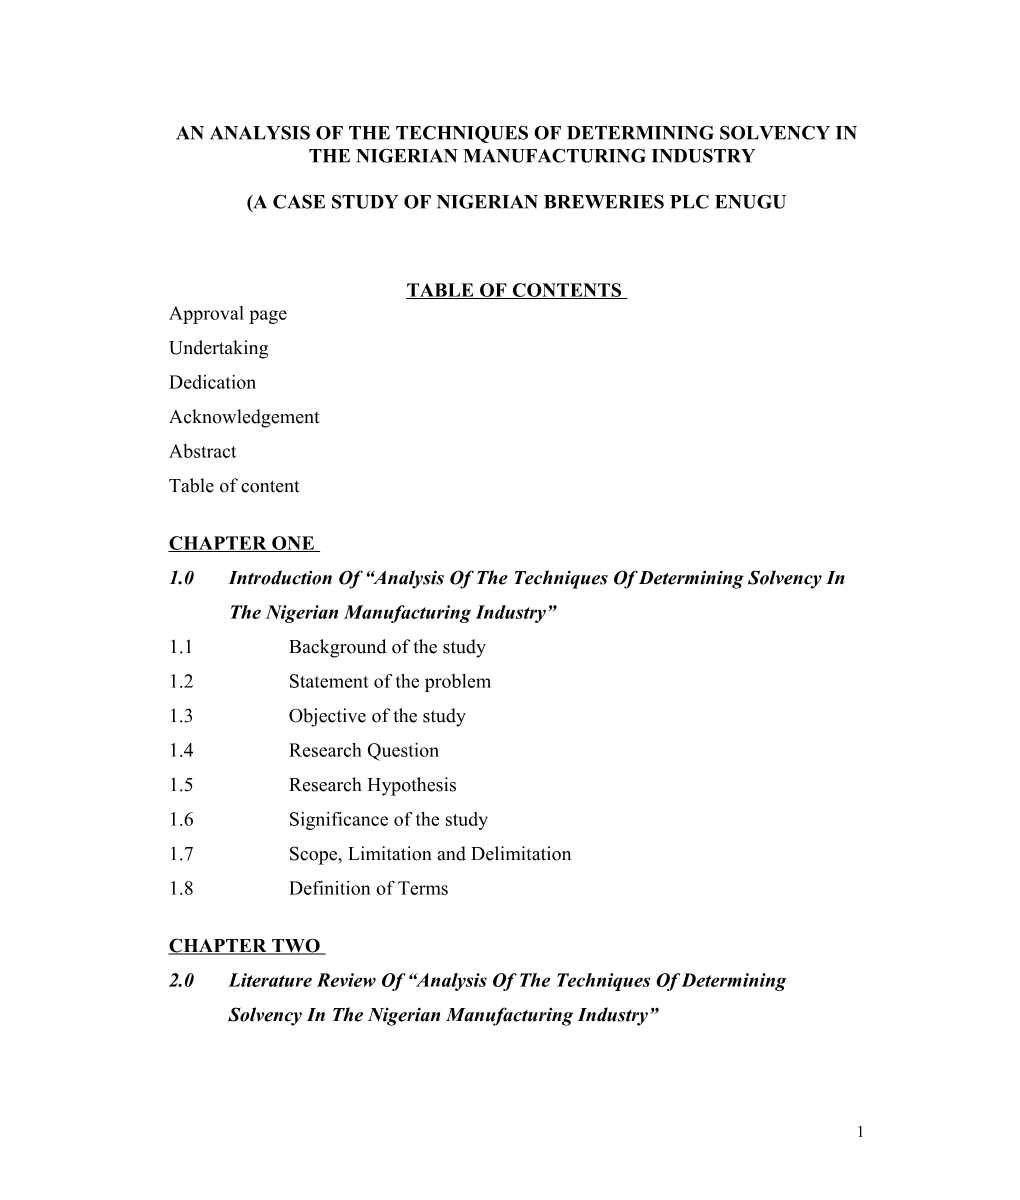 An Analysis of the Techniques of Determining Solvency in the Nigerian Manufacturing Industry